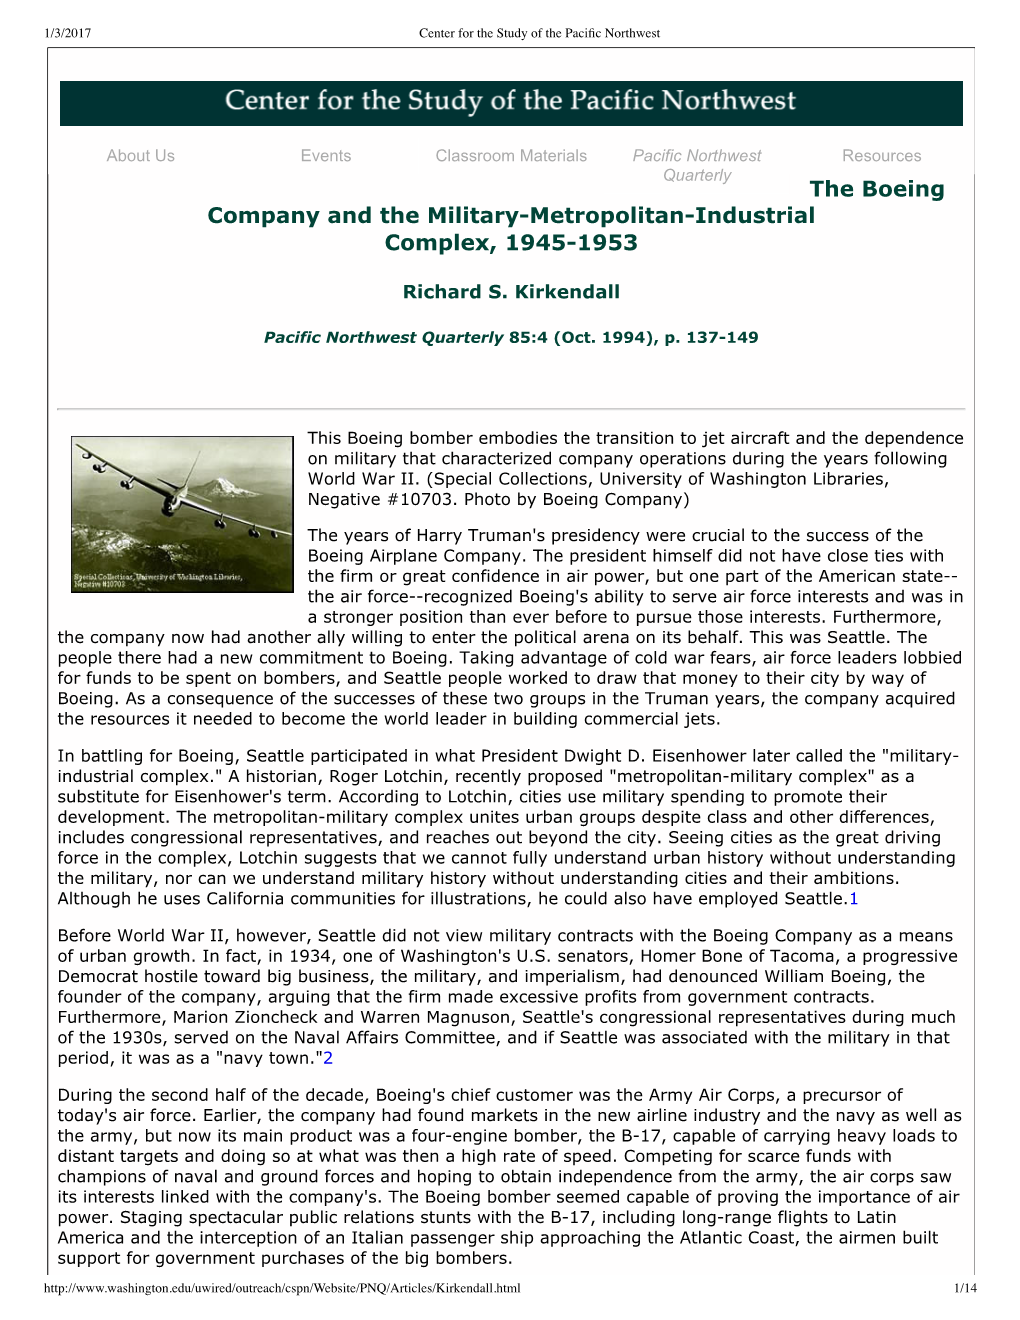 The Boeing Company and the Militarymetropolitanindustrial